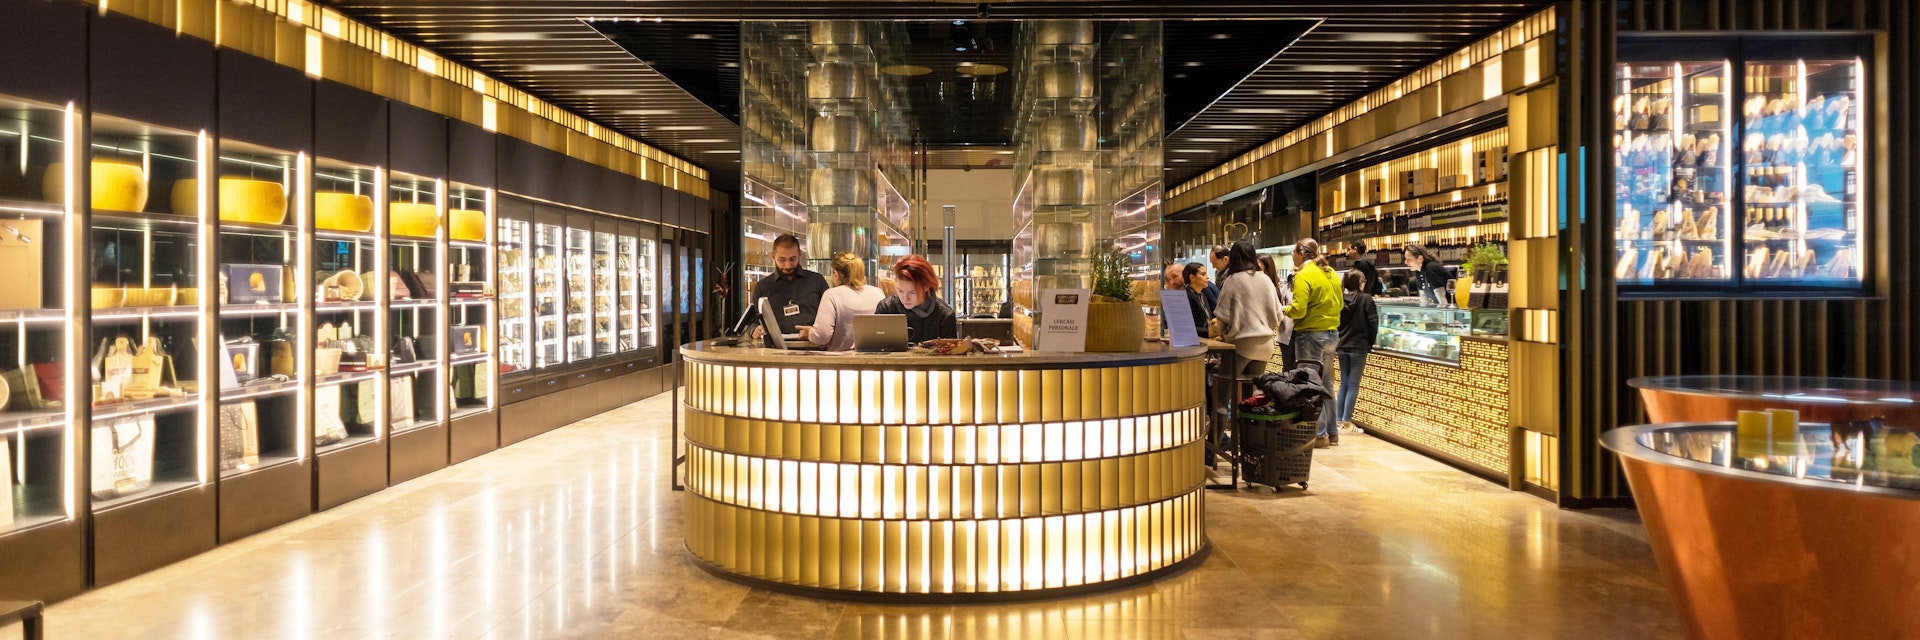 BOLOGNA, ITALY - CIRCA DECEMBER, 2017: Parmiggiano Reggiano store inside Fico Eataly World, located in Bologna, is the largest agrofood park in the world. Internal view.; Shutterstock ID 768732697; your: Bridget Brown; gl: 65050; netsuite: Online Editorial; full: POI Image Update